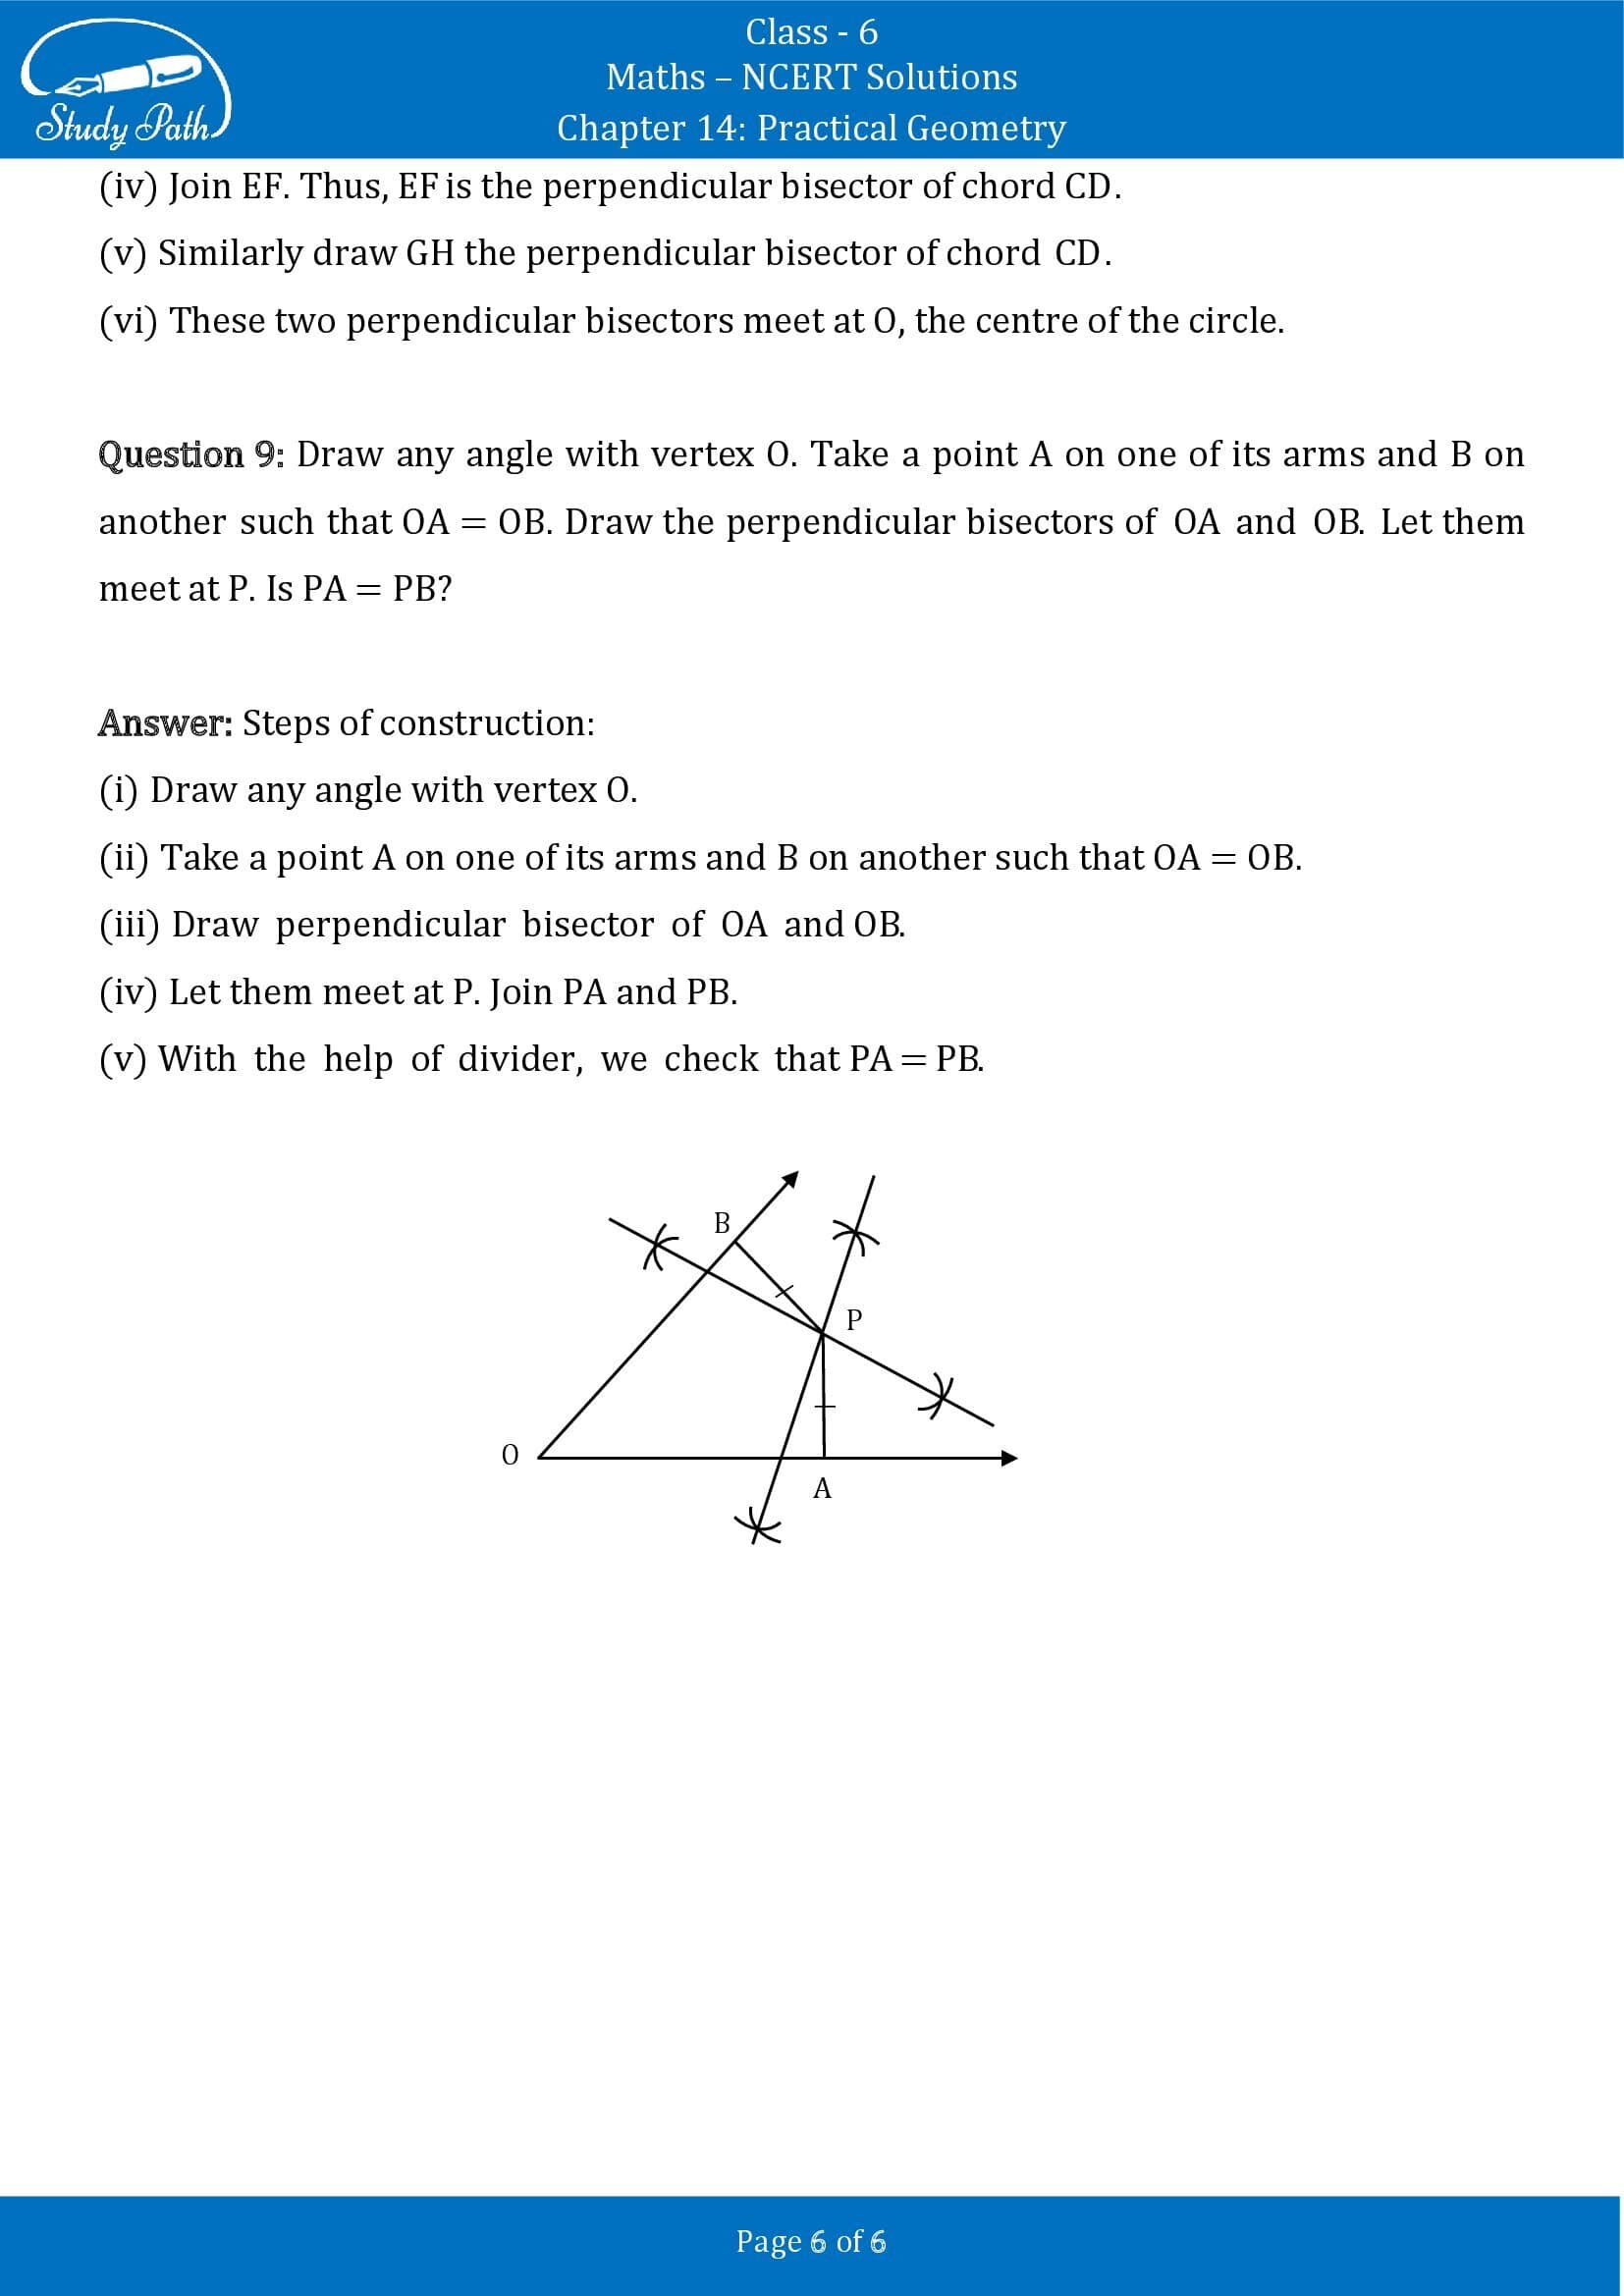 NCERT Solutions for Class 6 Maths Chapter 14 Practical Geometry Exercise 14.5 00006